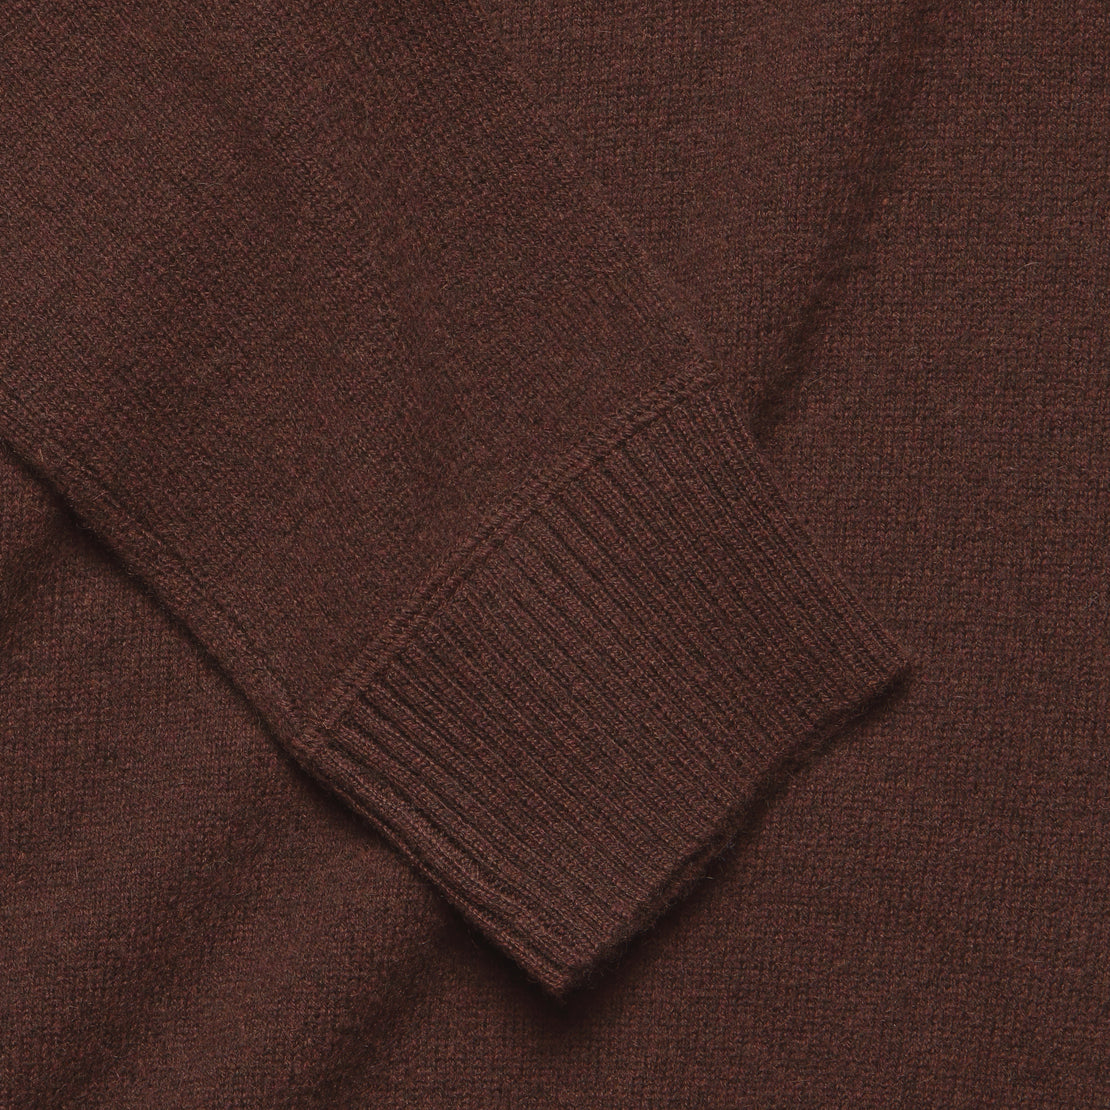 Columbia Cashmere Sweater - Brown - Life After Denim - STAG Provisions - Tops - Sweater